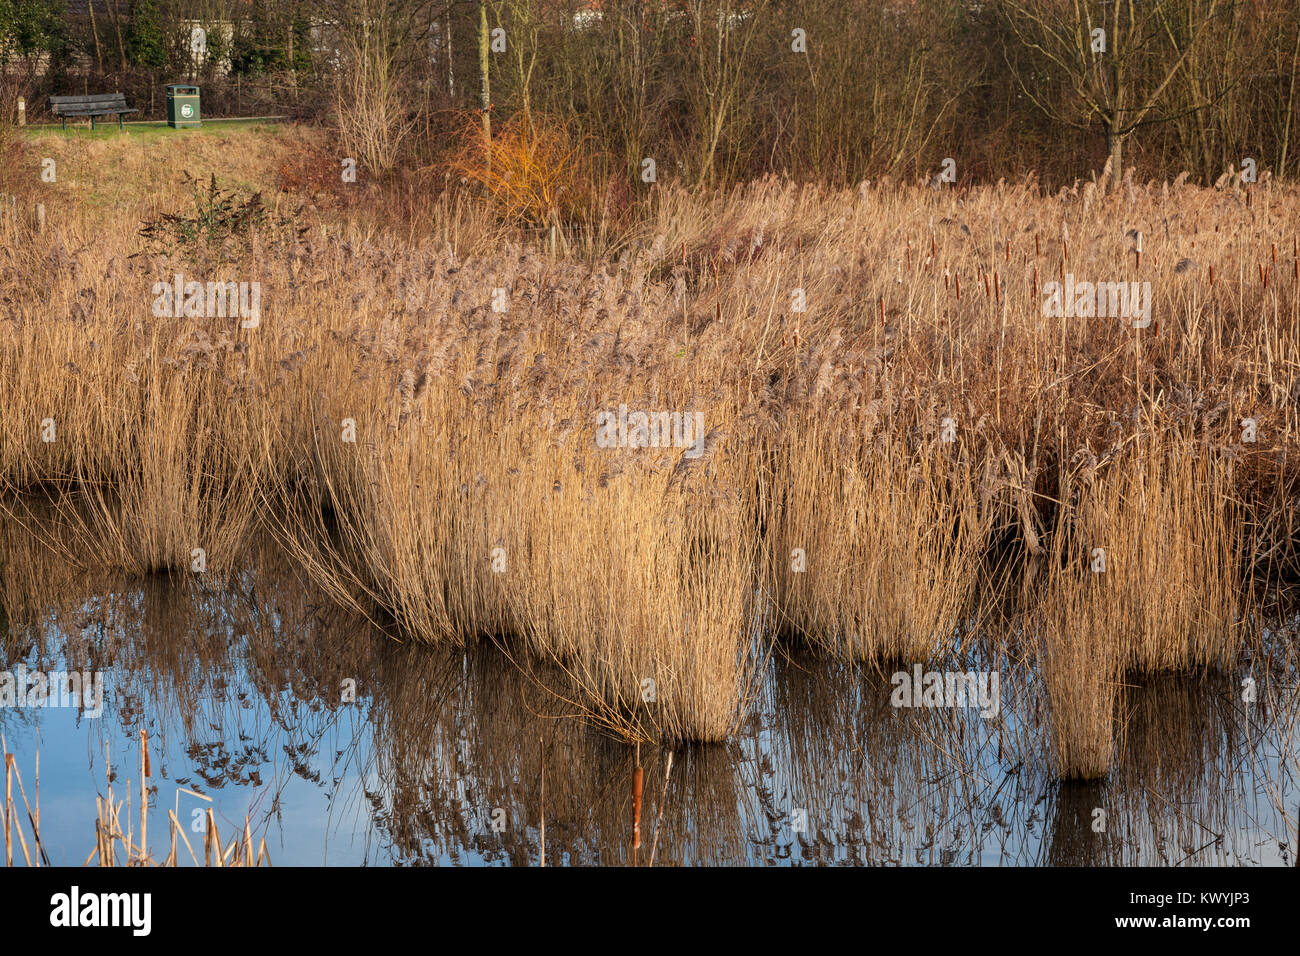 Bishops Stortford, St Michael's Mead, Southern Country Park, sedges and bulrushes in settlement pond, reflections Stock Photo